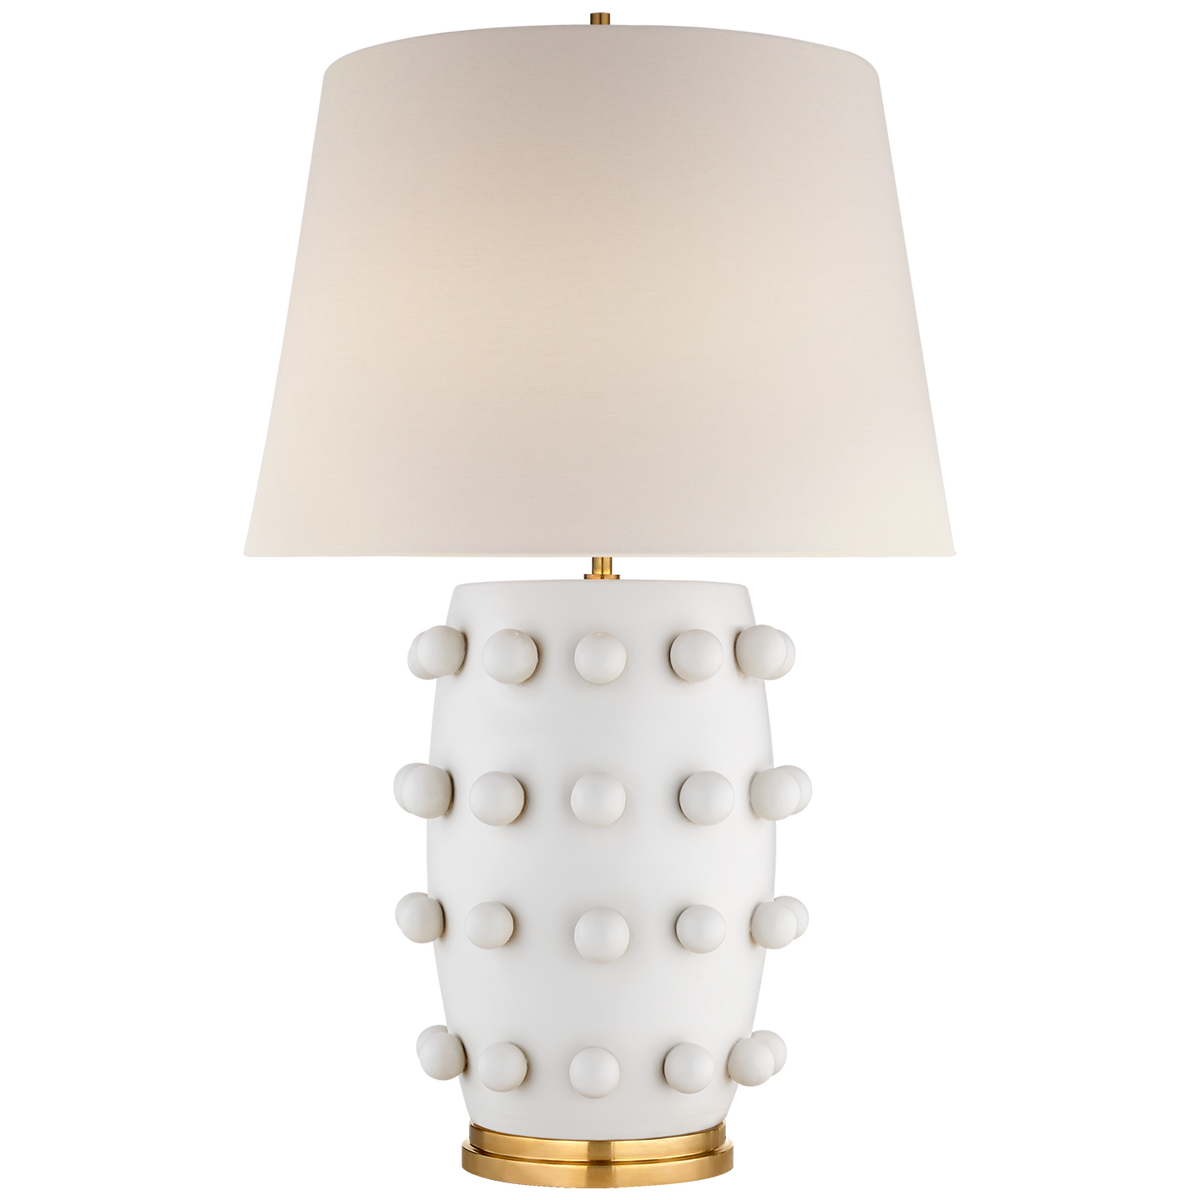 Linden Table Lamp Medium - Plaster White with Linen Shade